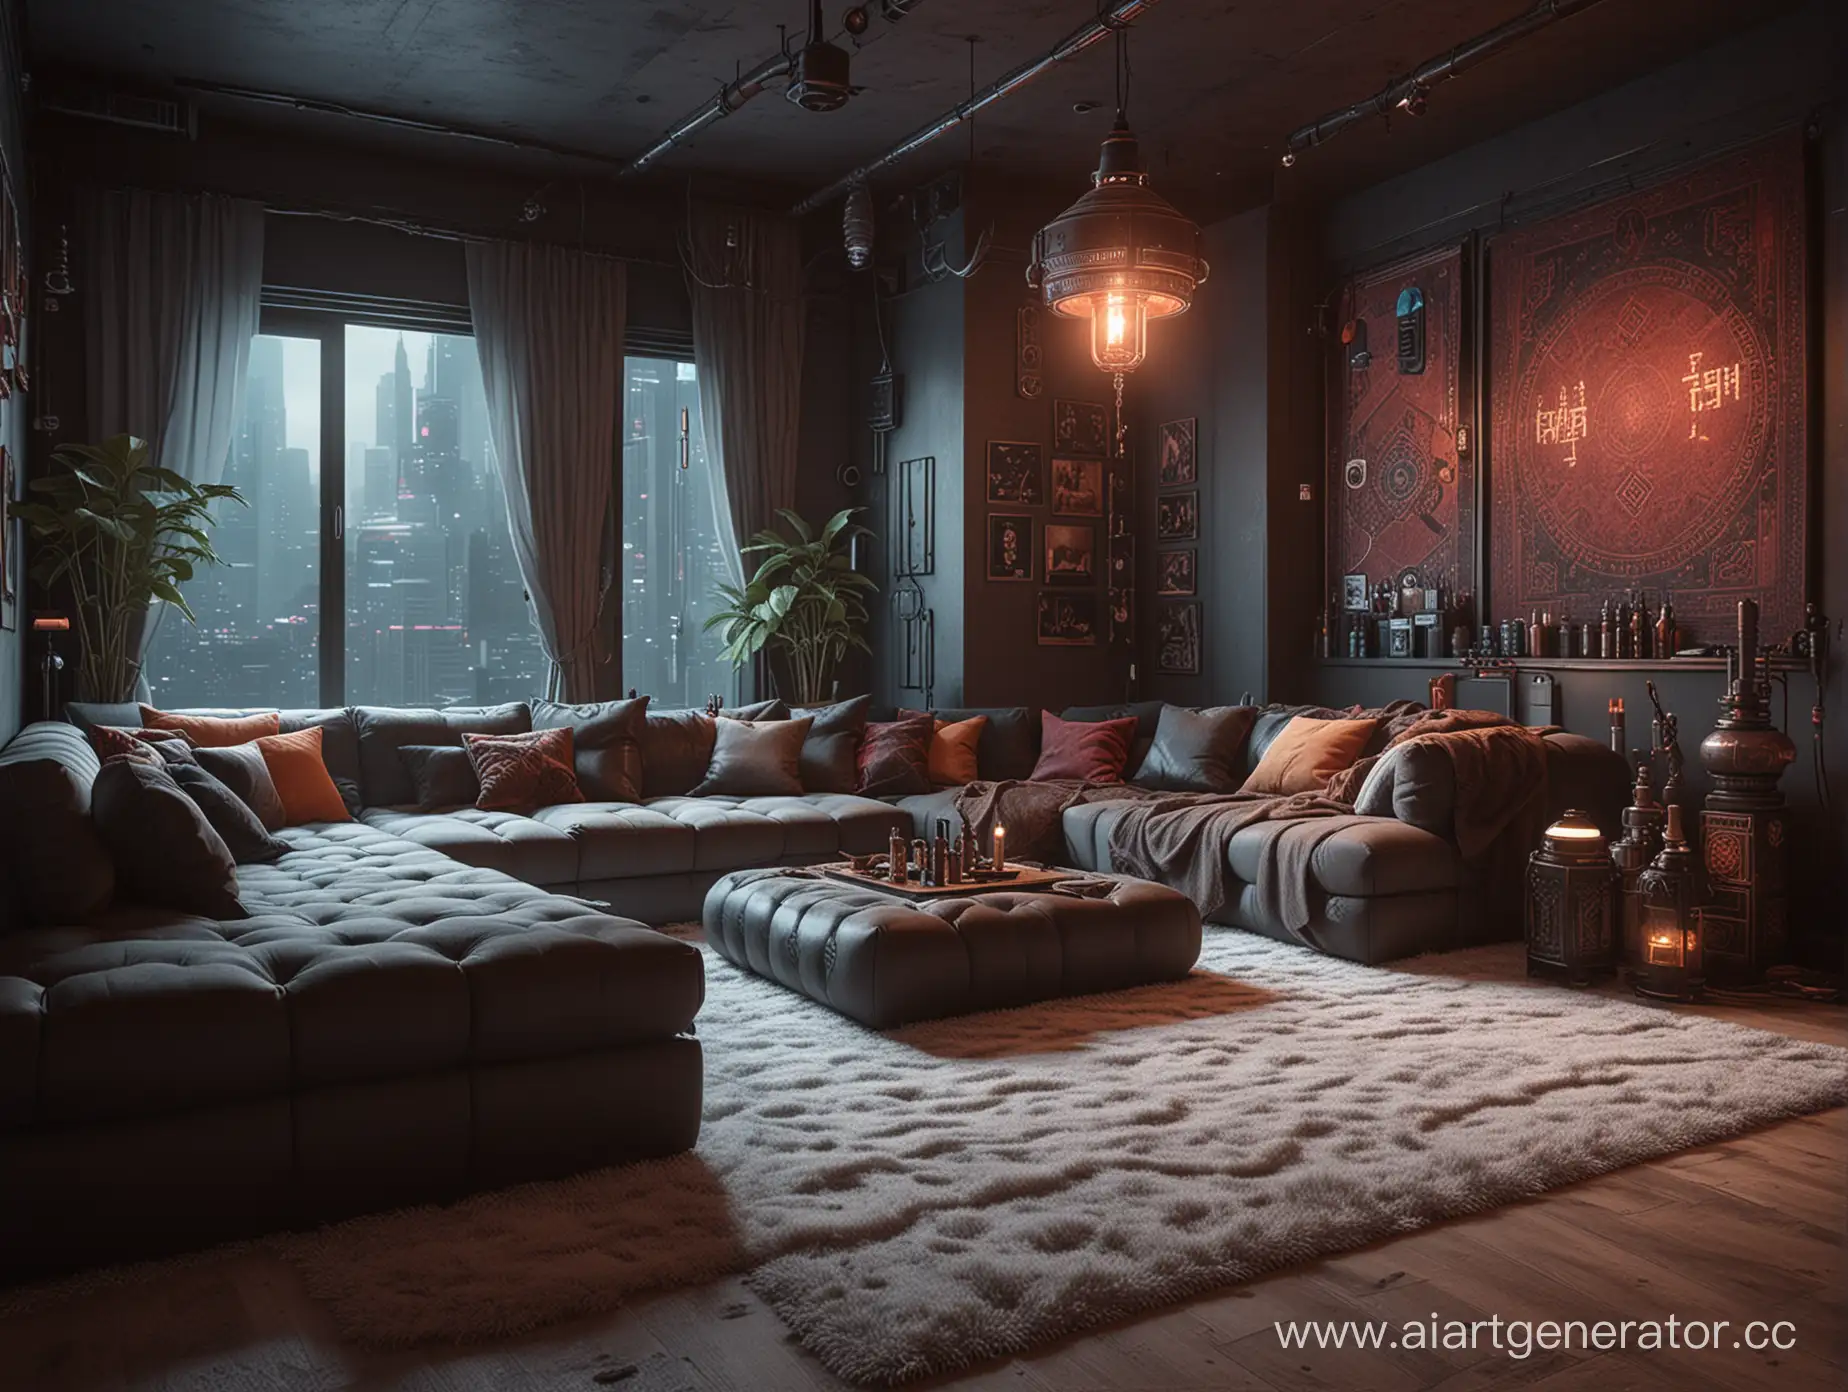 Futuristic-Apartment-Relaxation-Cyberpunk-Scene-with-Hookah-and-HighTech-Comfort